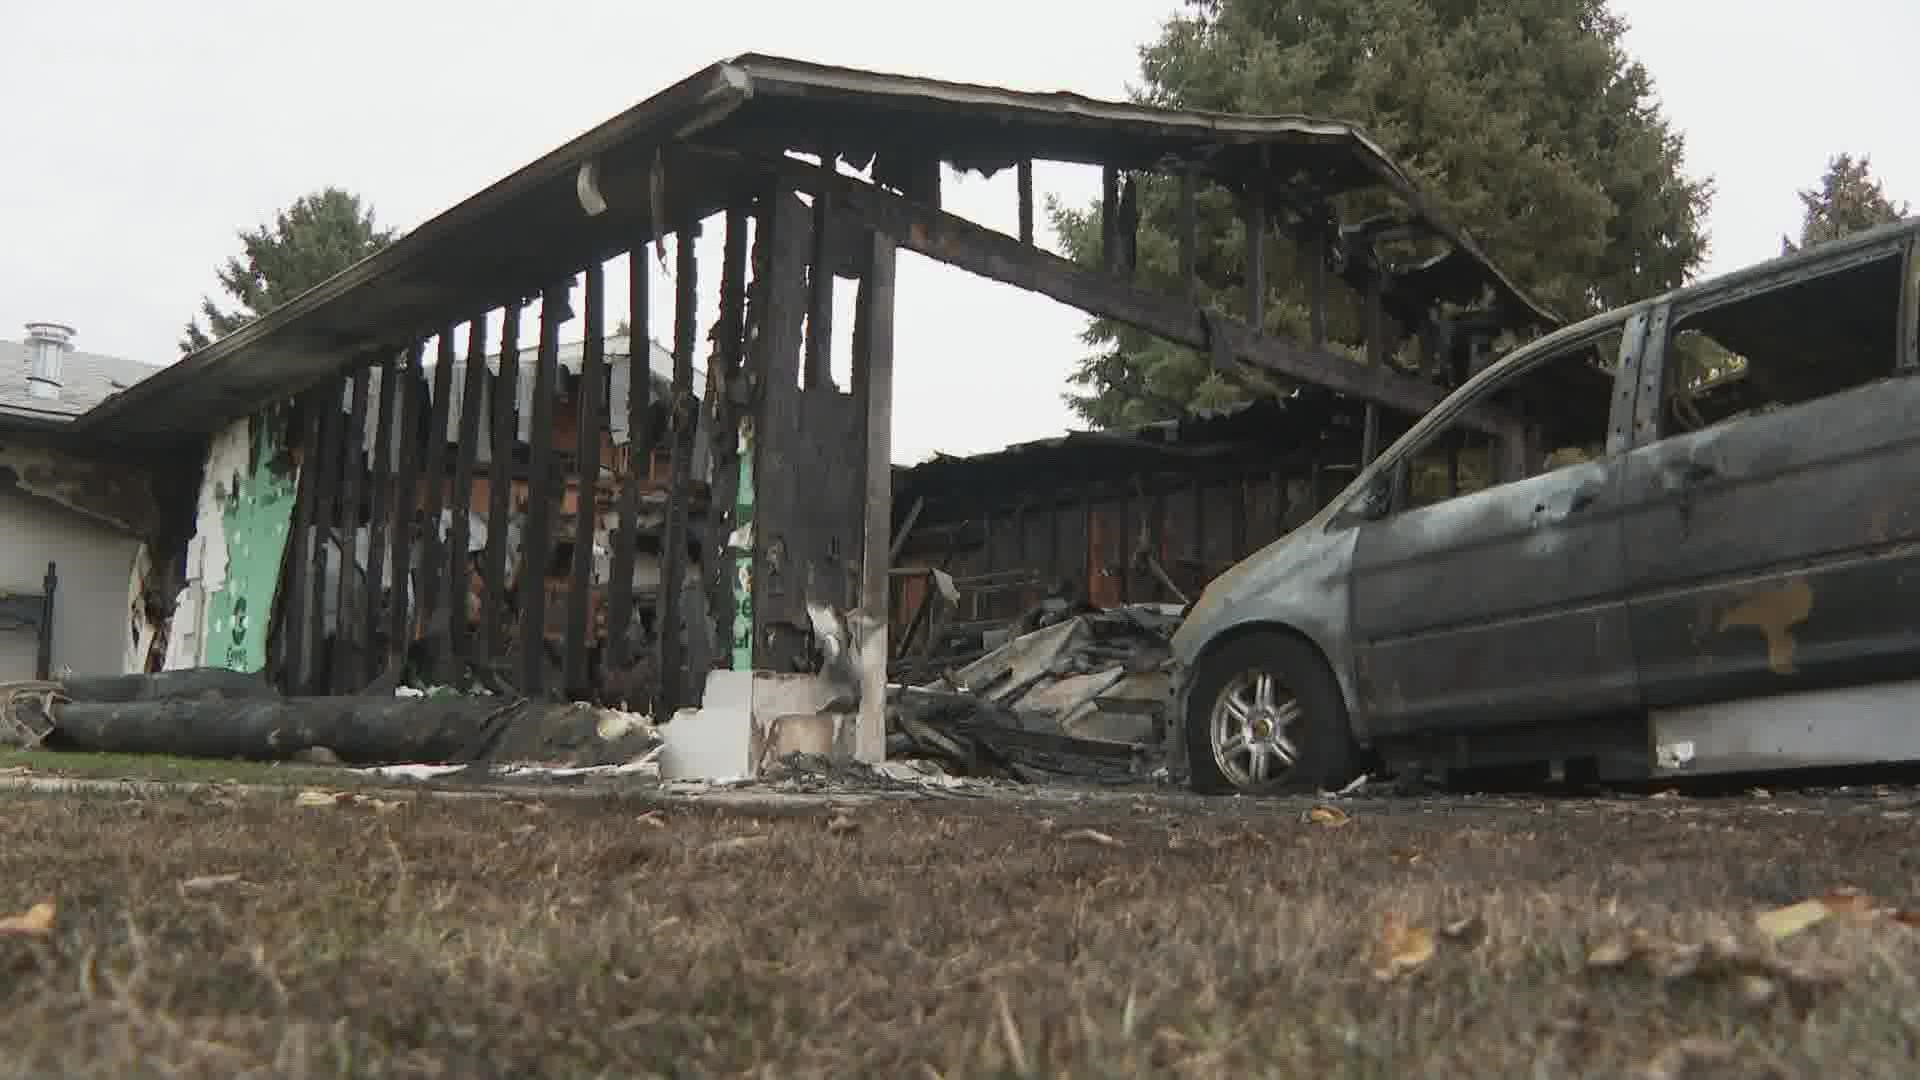 Lance Carr was playing a game of Diablo when his nephew alerted him to a fire in the garage. The fire spread to the house and destroyed three cars.